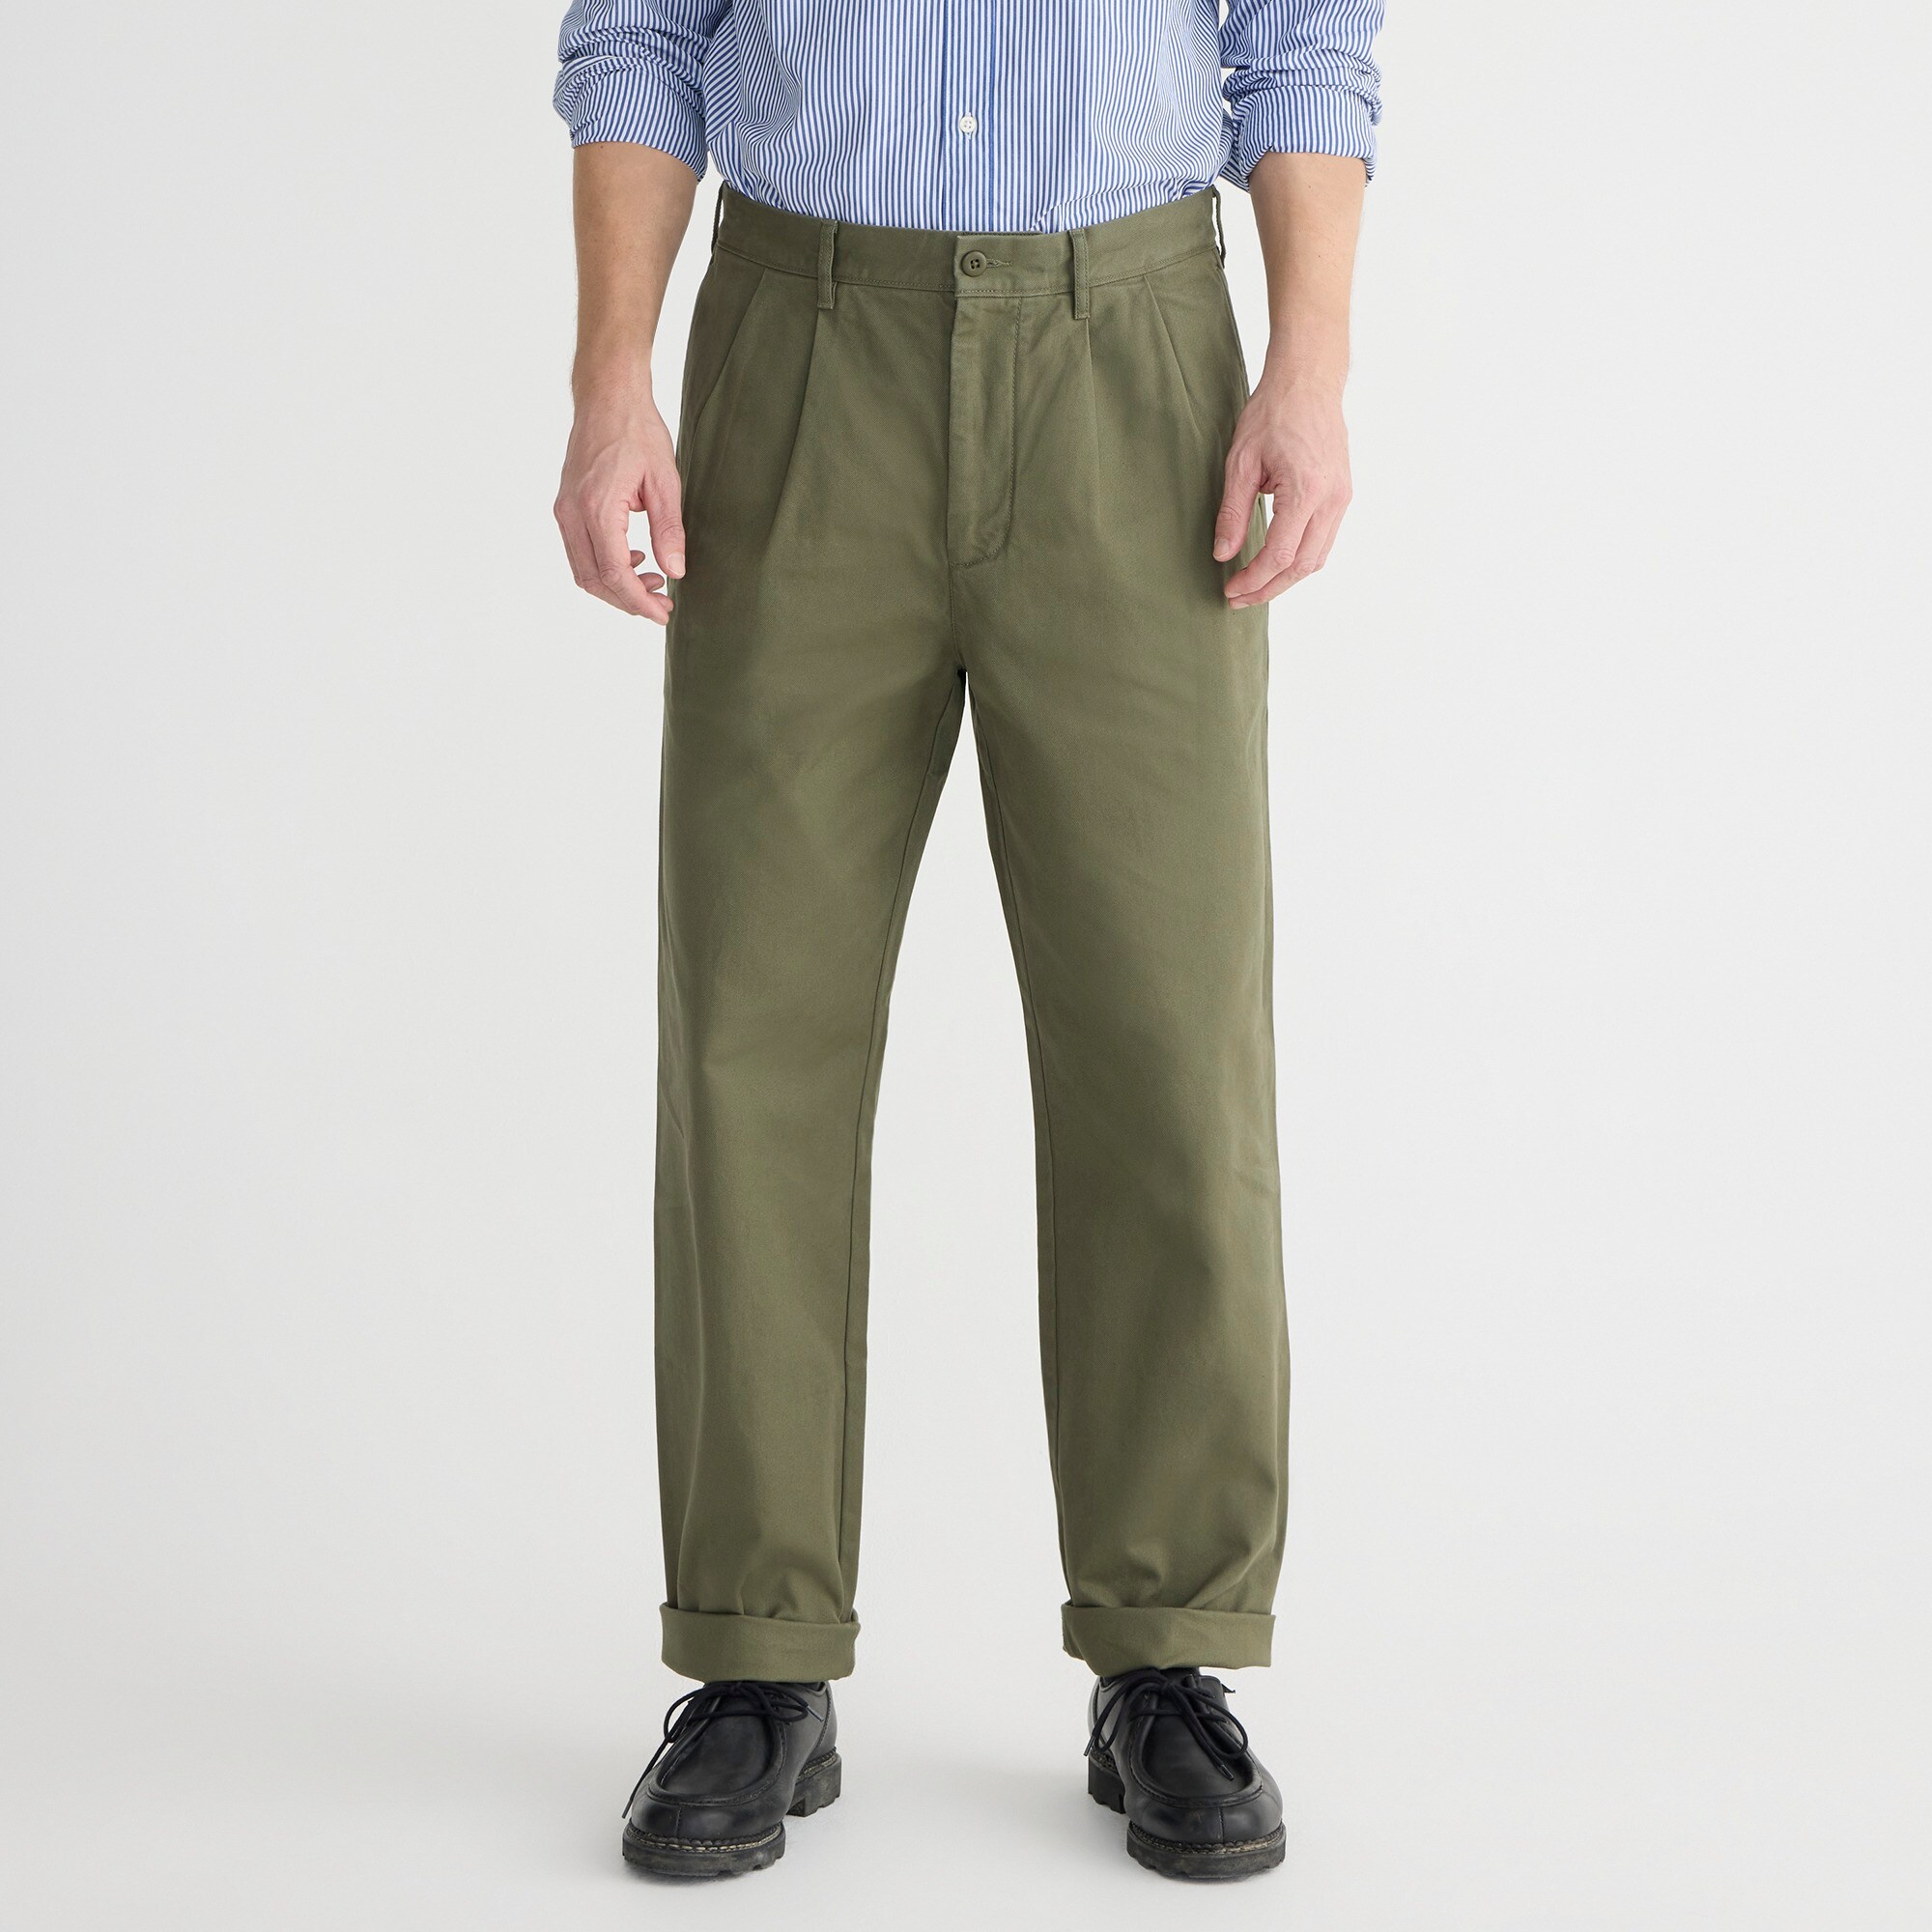 j.crew: classic double-pleated chino pant for men